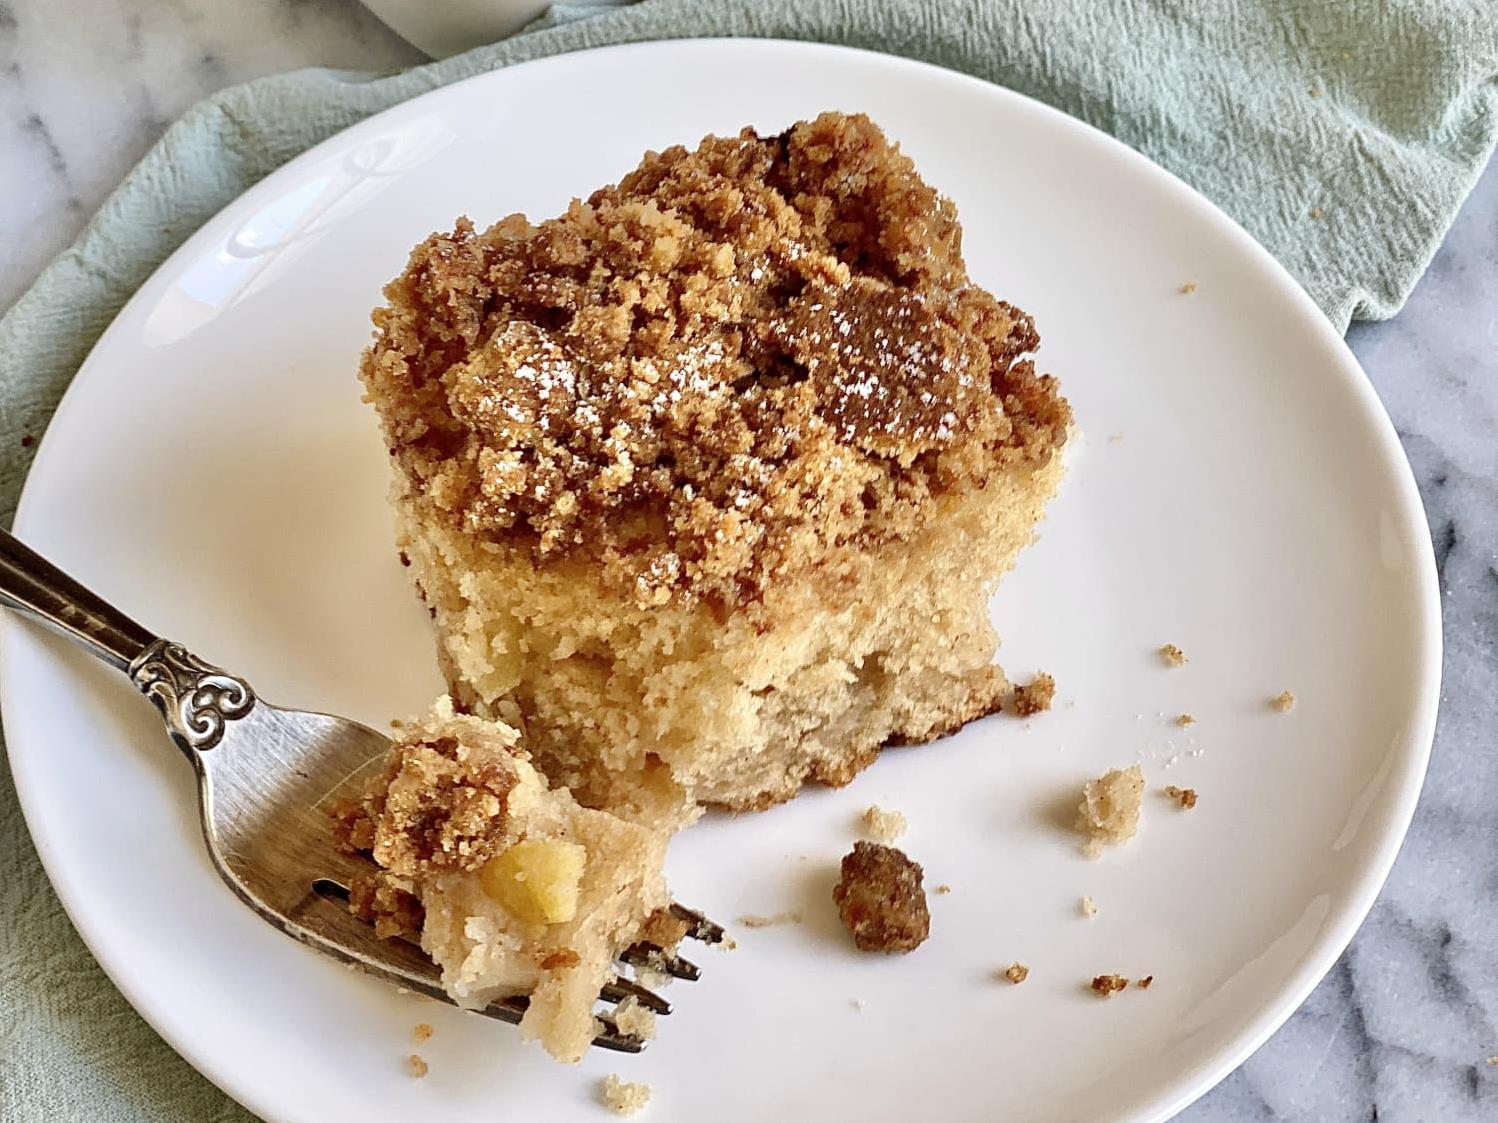  A warm slice of apple coffee cake, just out of the oven, is like a hug in food form.